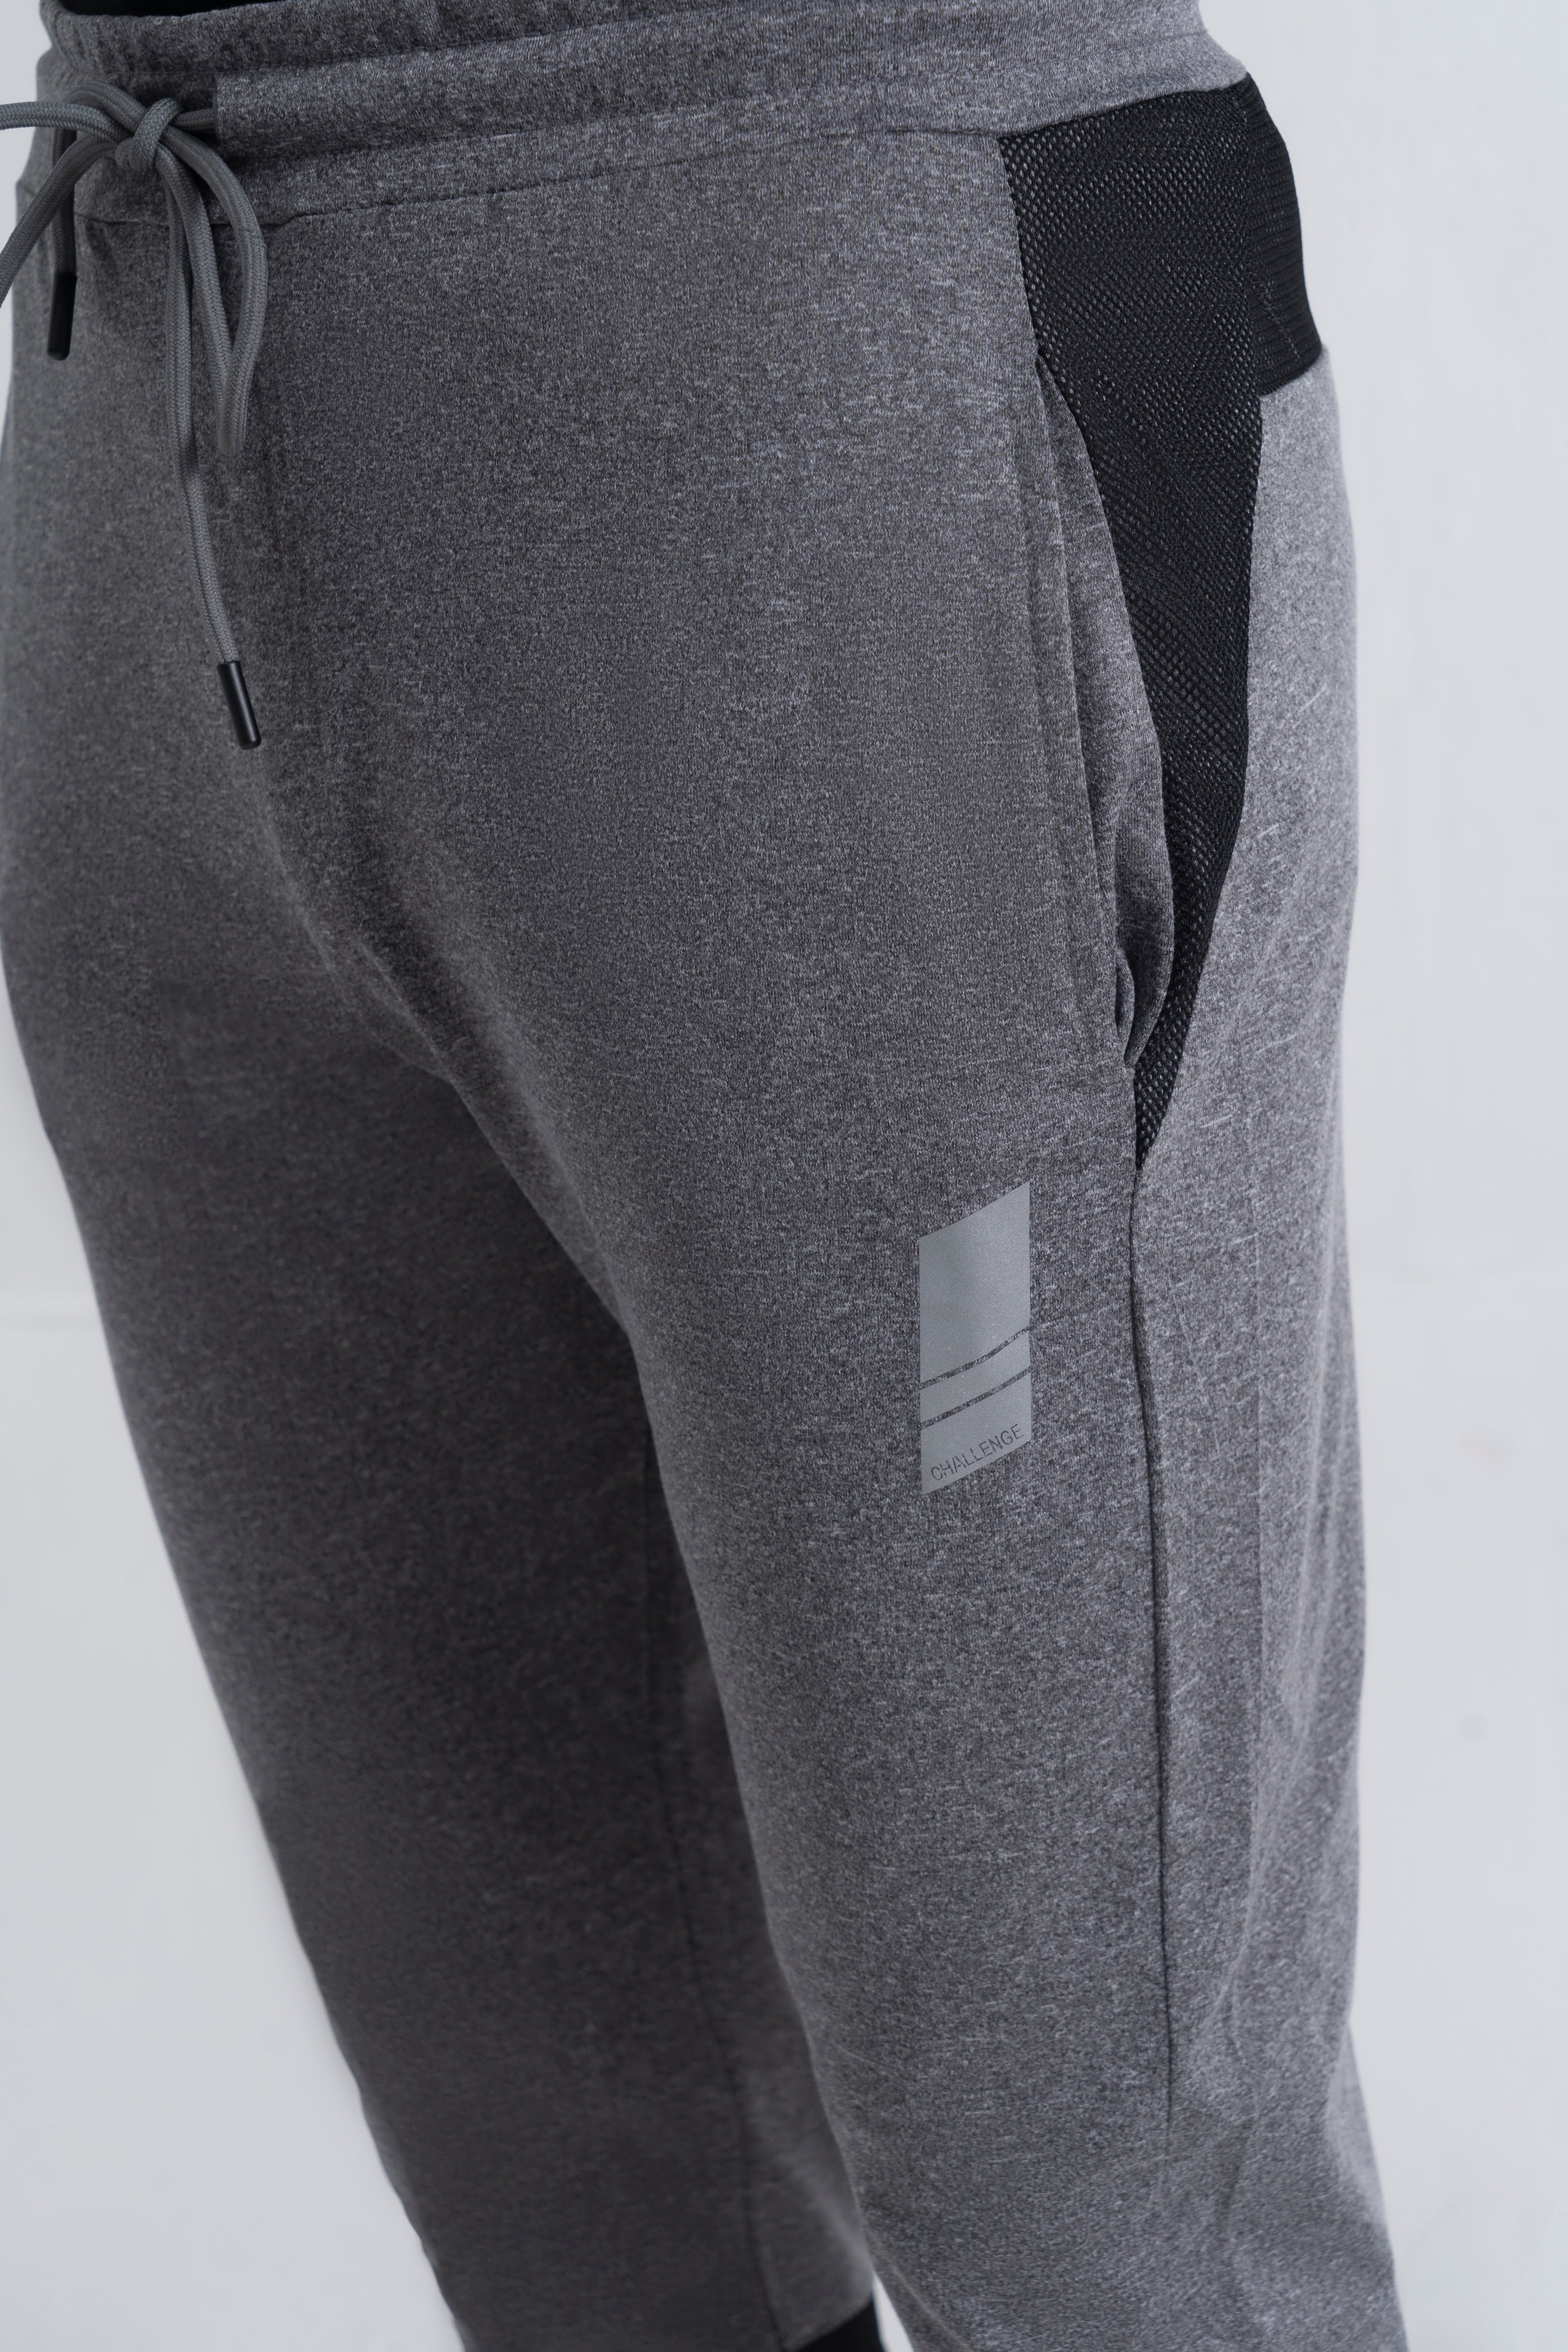 Grey Dry Fit Trousers